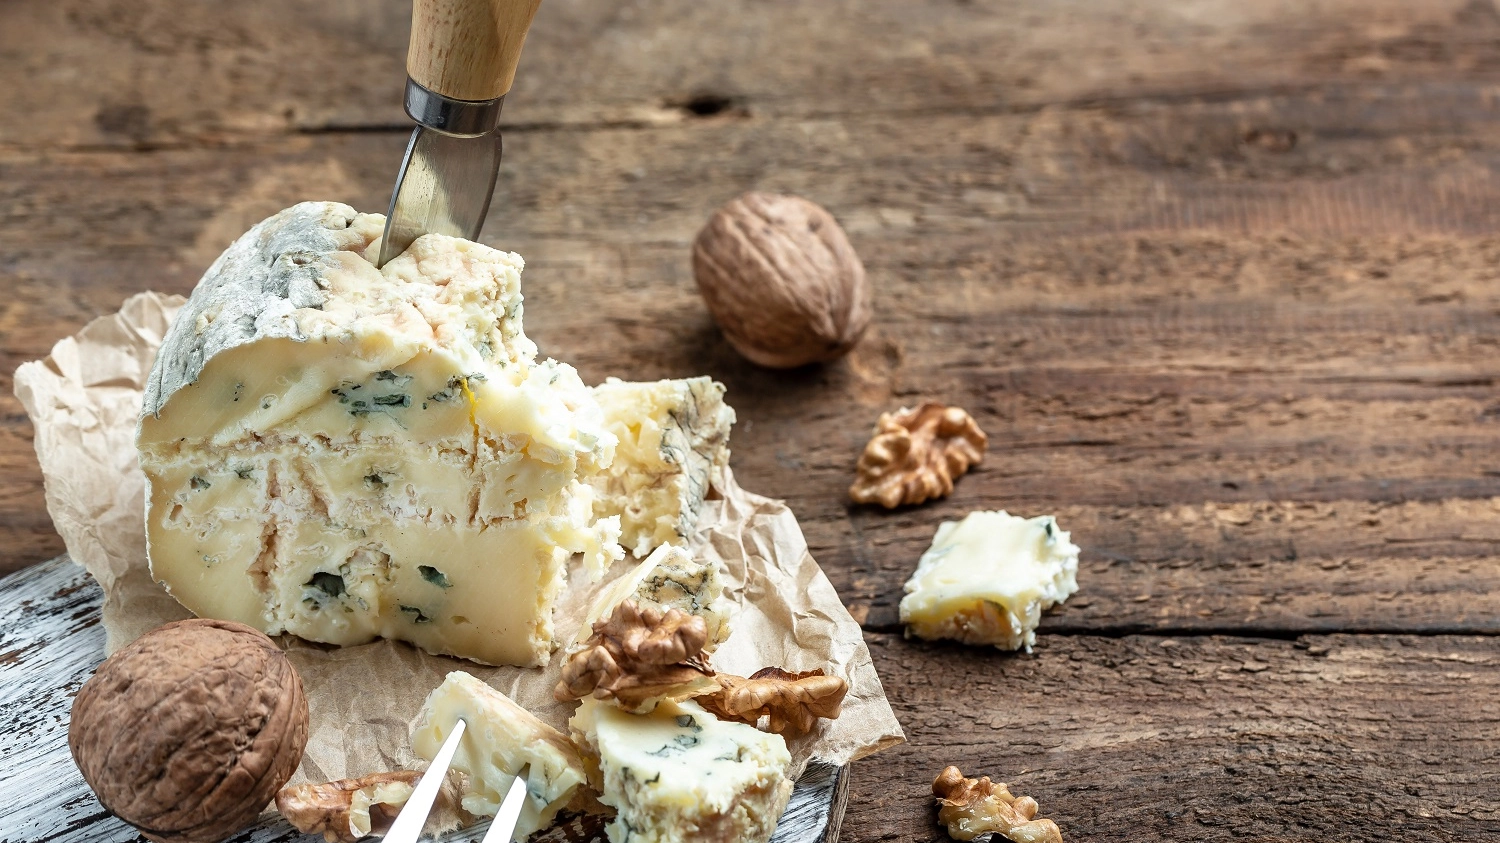 Blue cheese dorblu, gorgonzola, roquefort with walnuts on wooden background. banner, menu, recipe place for text